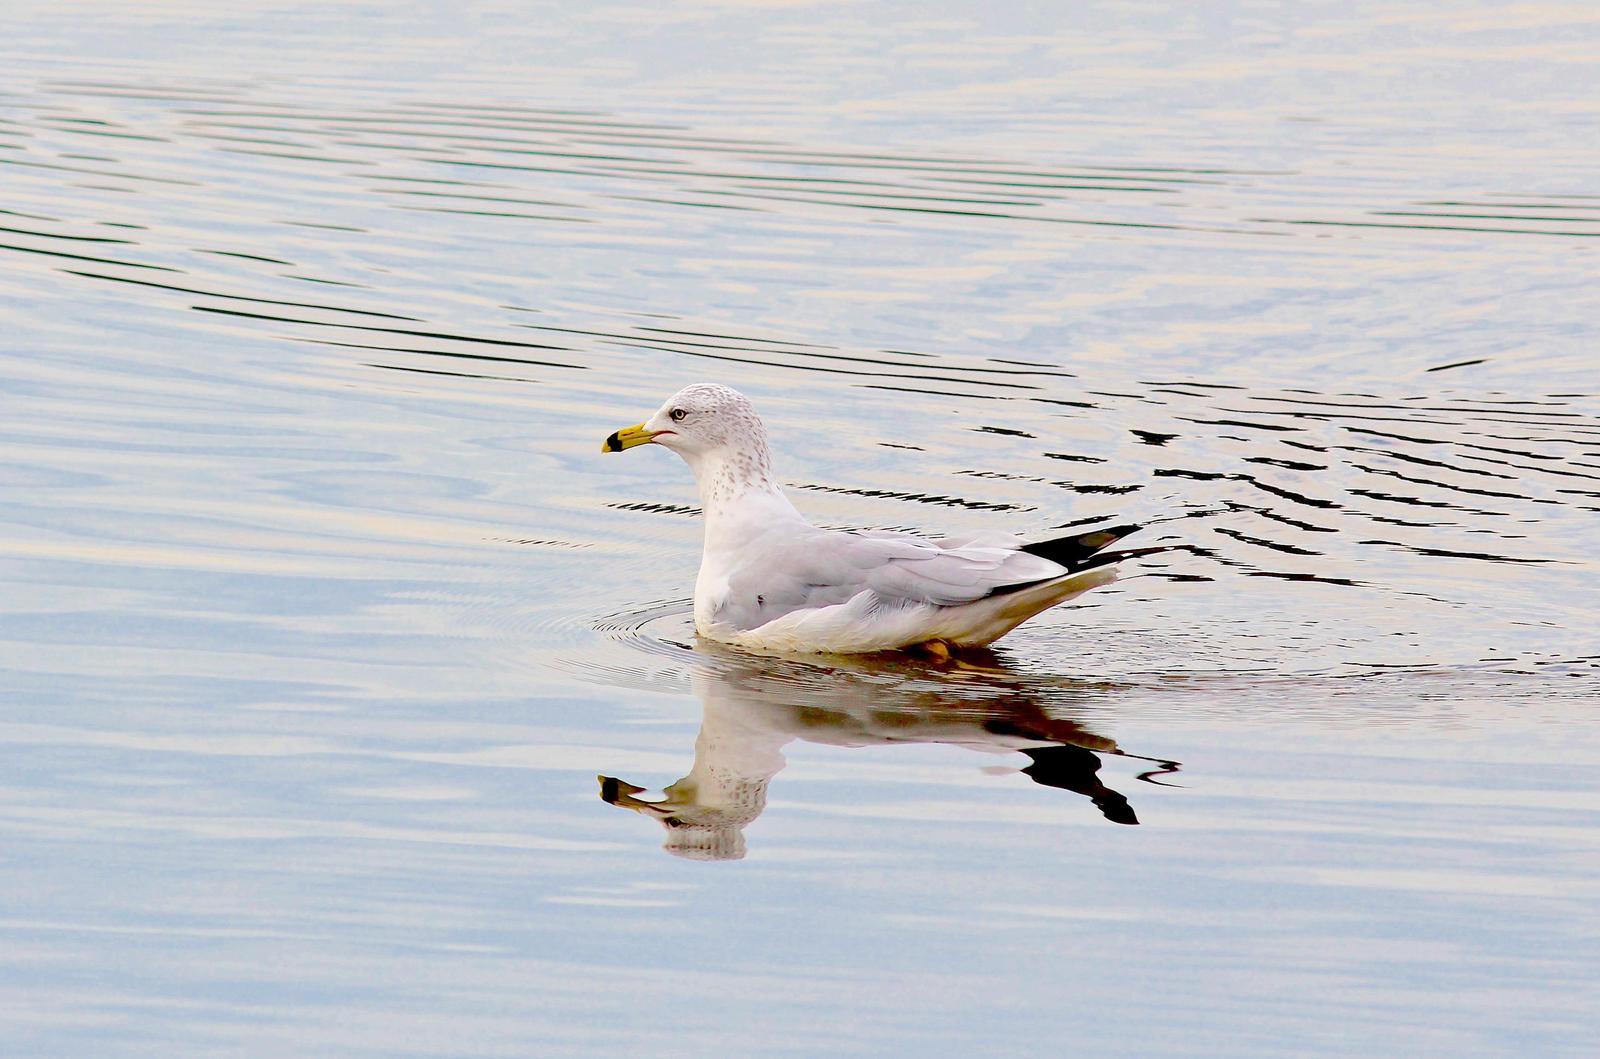 Ring-billed Gull Photo by Kathryn Keith